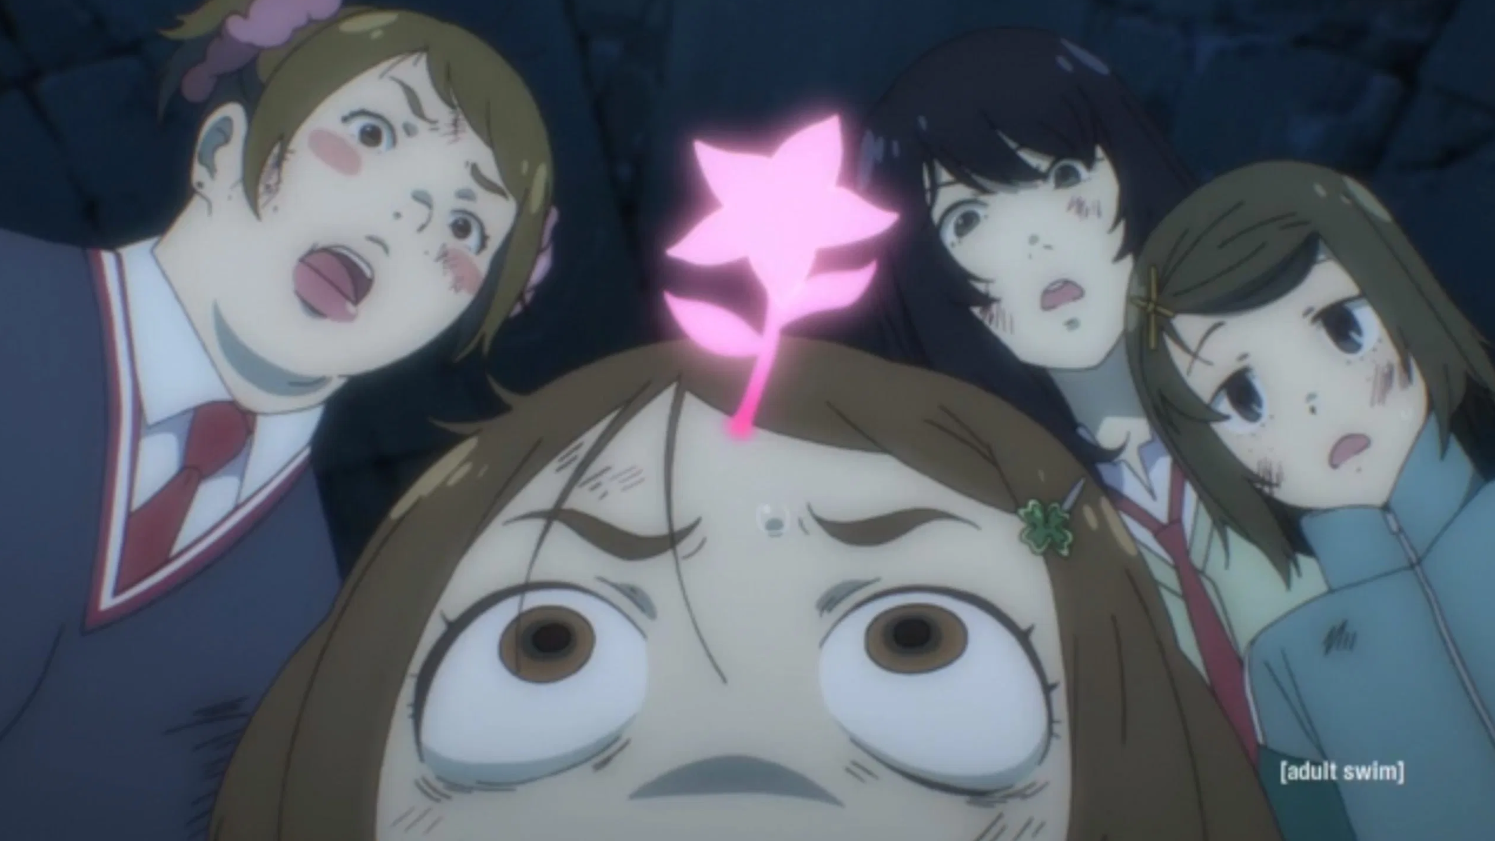 Episode One: Kana has a sprout growing from her forehead from the effects of N.O.